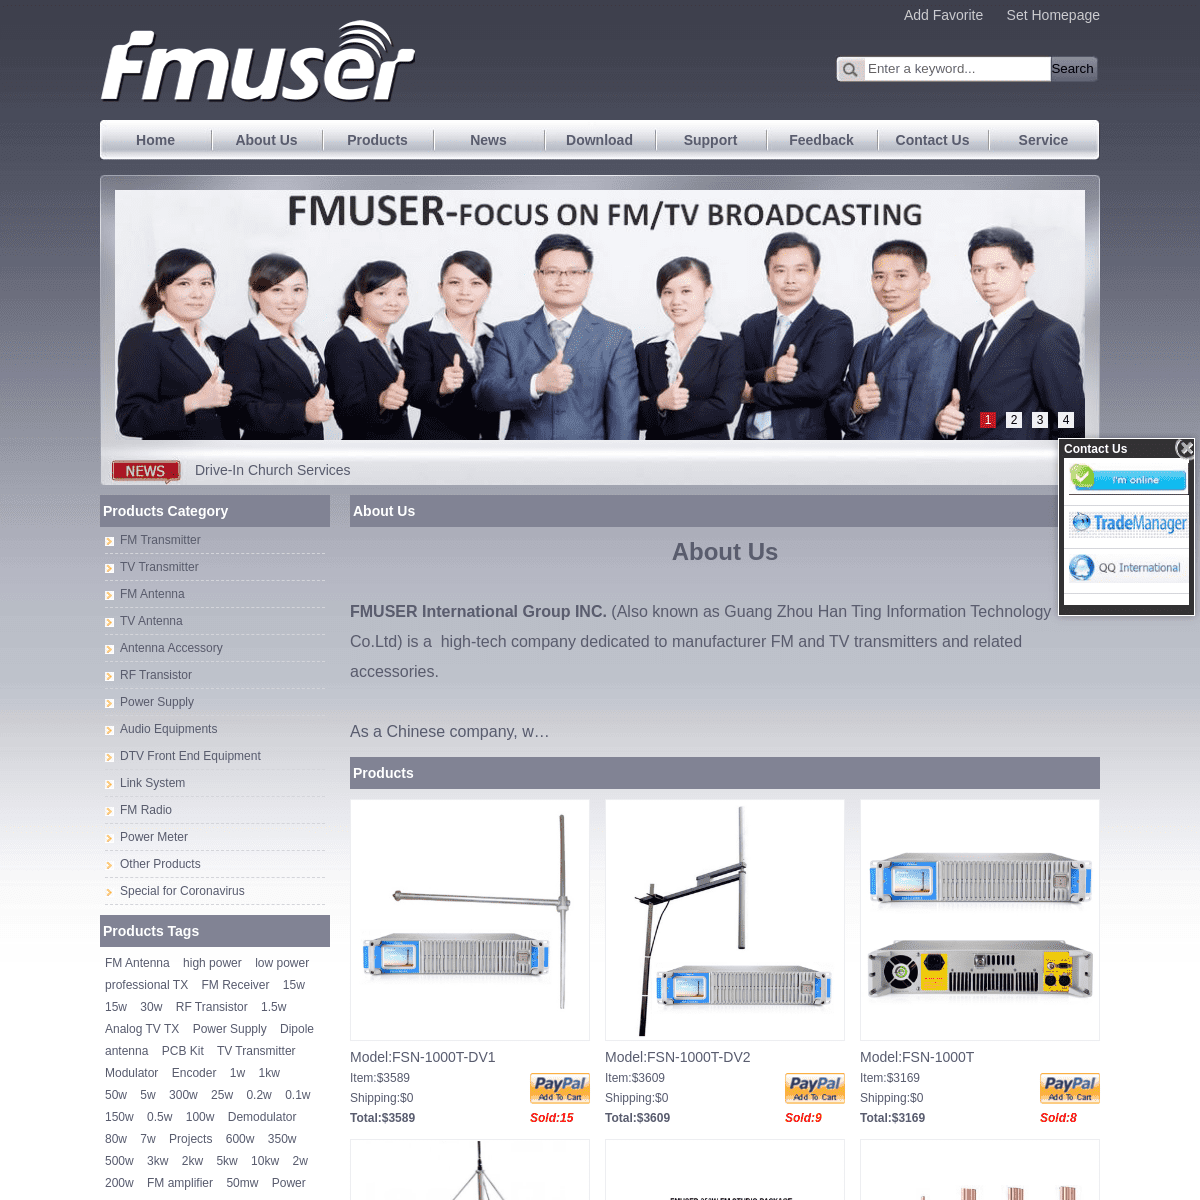 A complete backup of fmuser.net